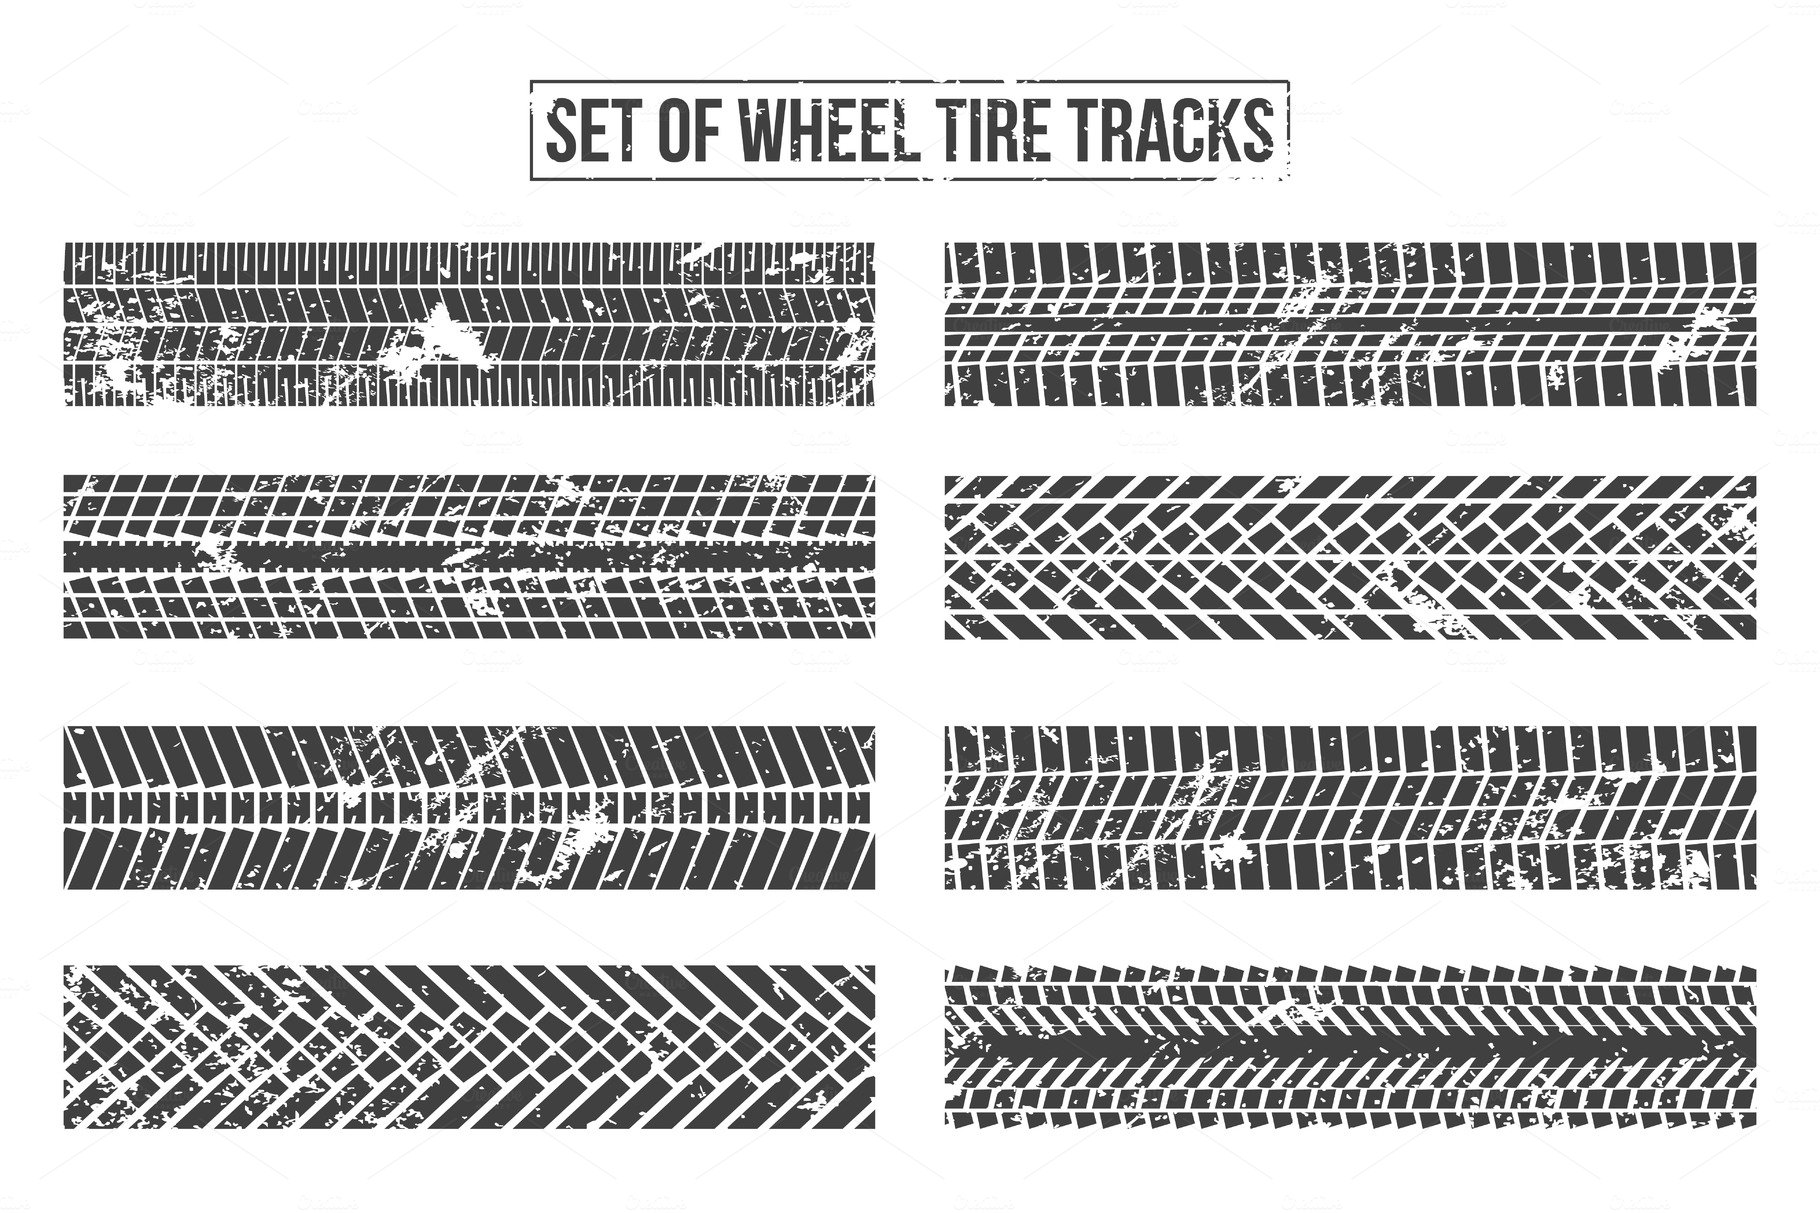 Wheel tire tracks. Winding trace. cover image.